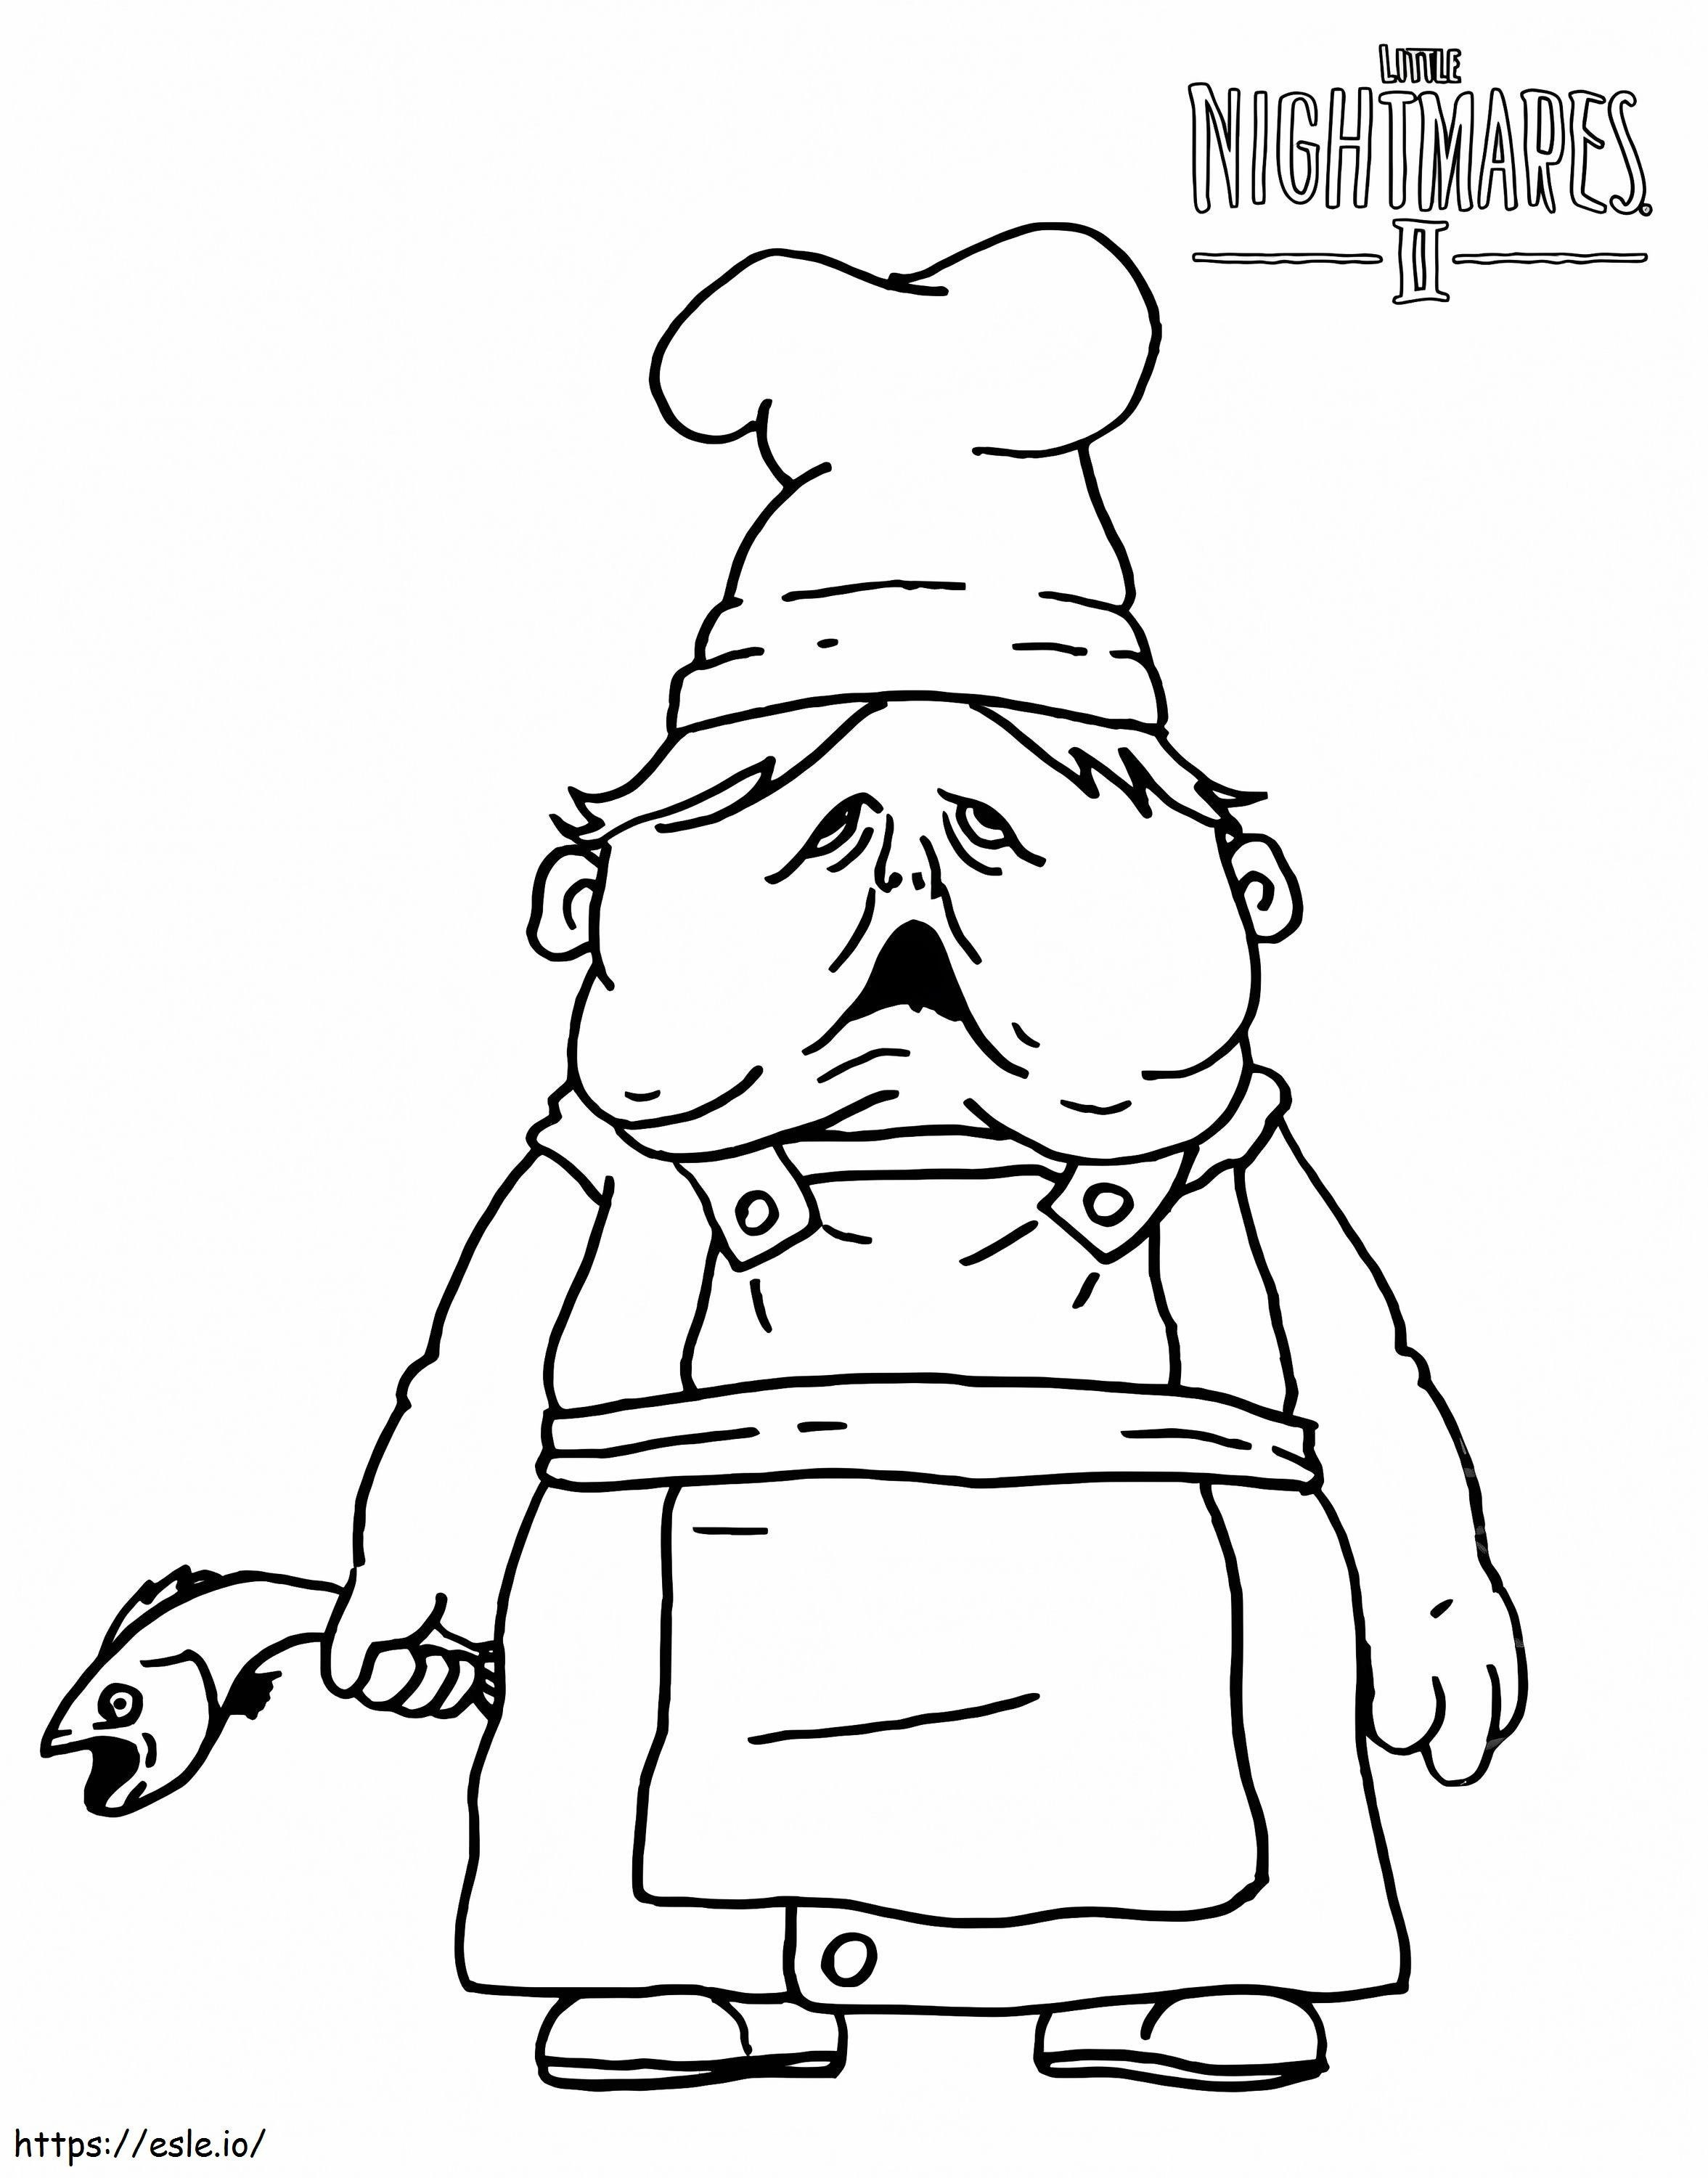 Little Nightmares Chef coloring page